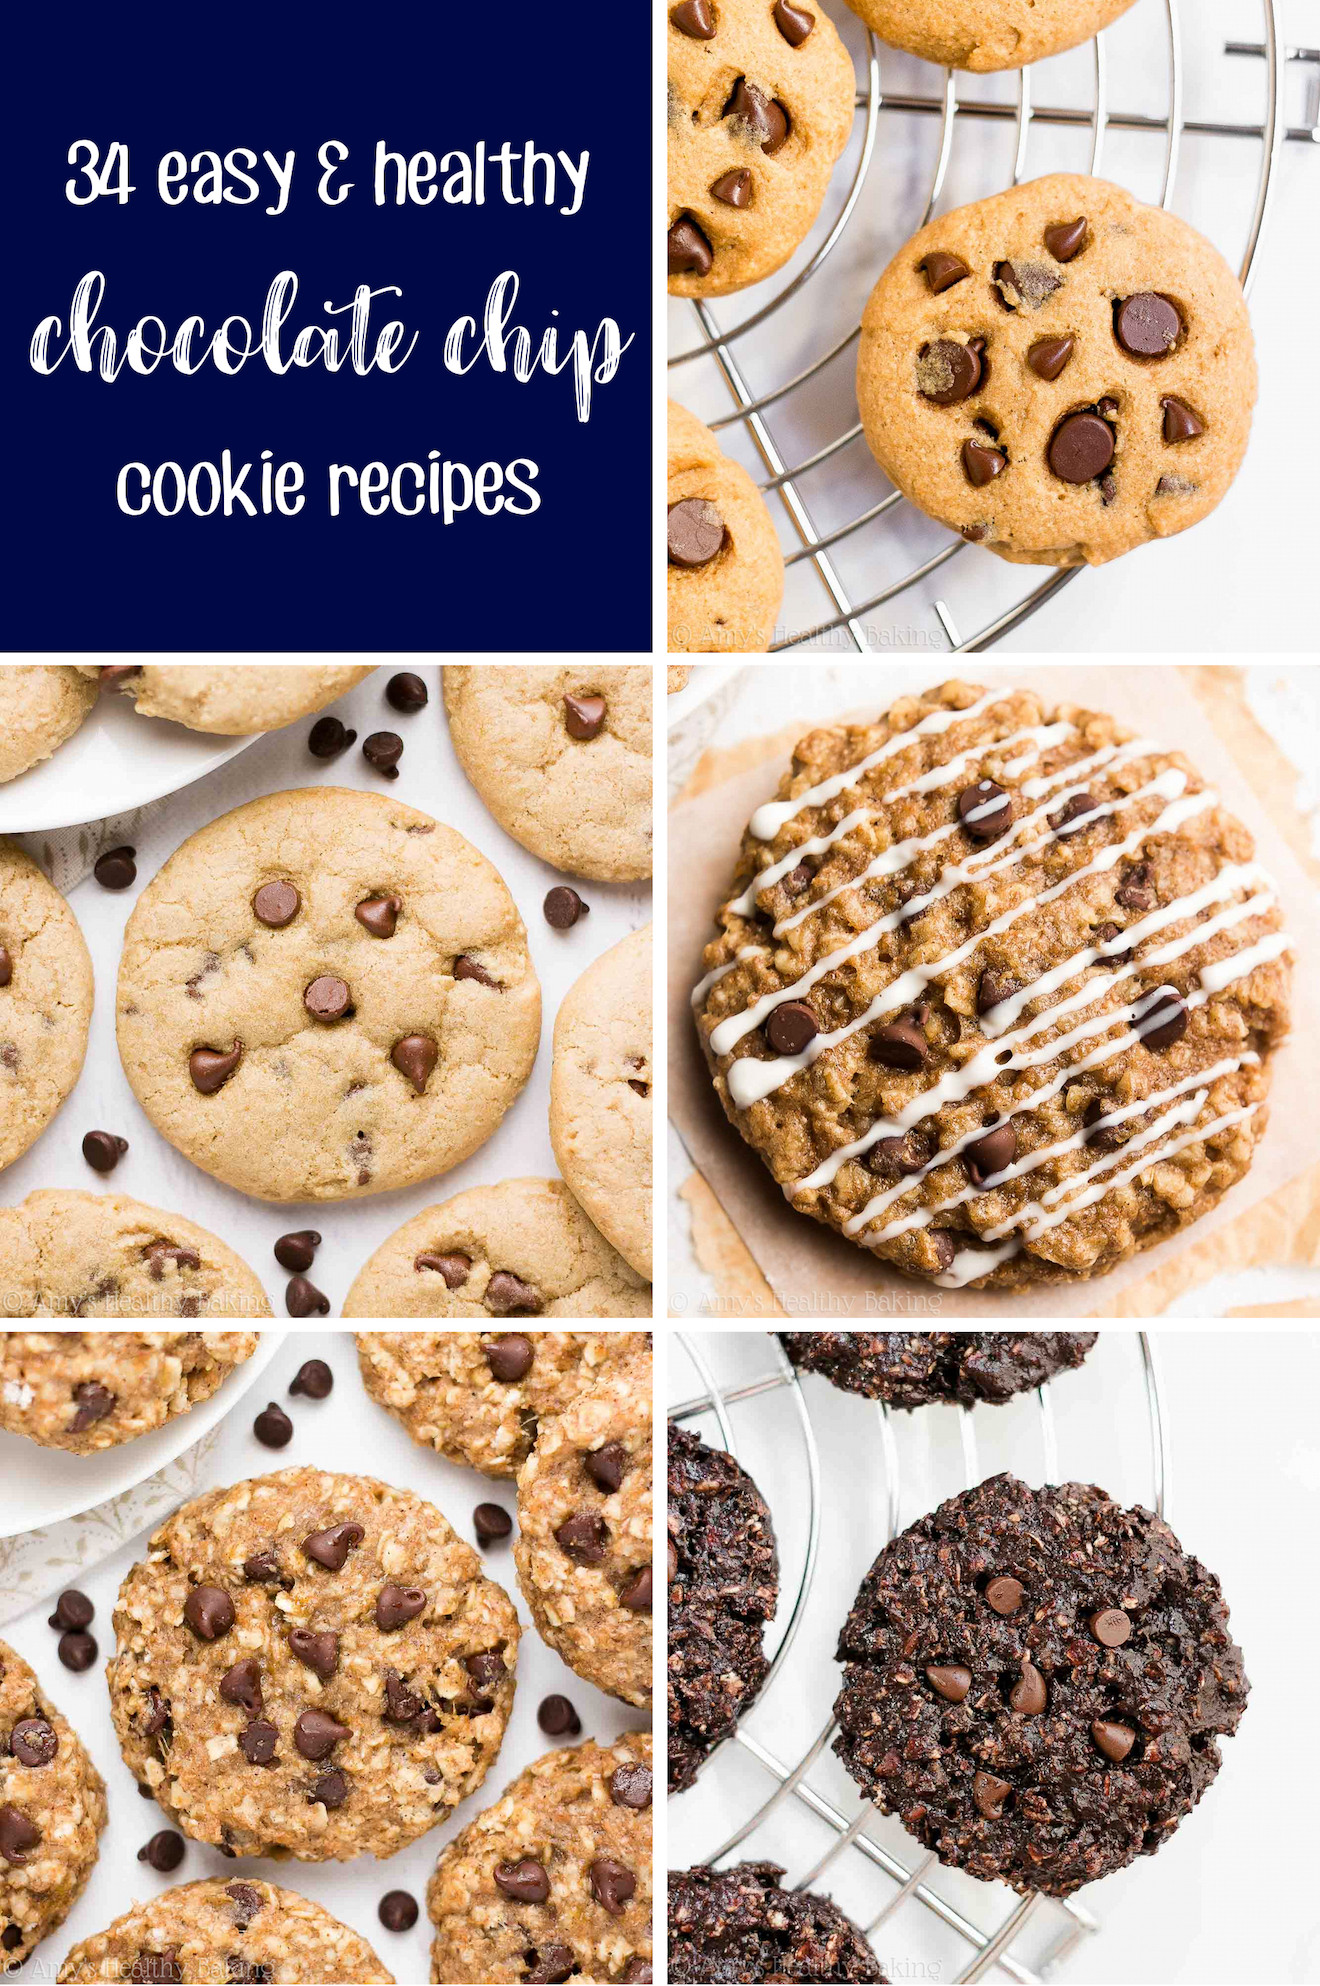 Easy Healthy Chocolate Chip Cookies
 34 Easy & Healthy Chocolate Chip Cookie Recipes